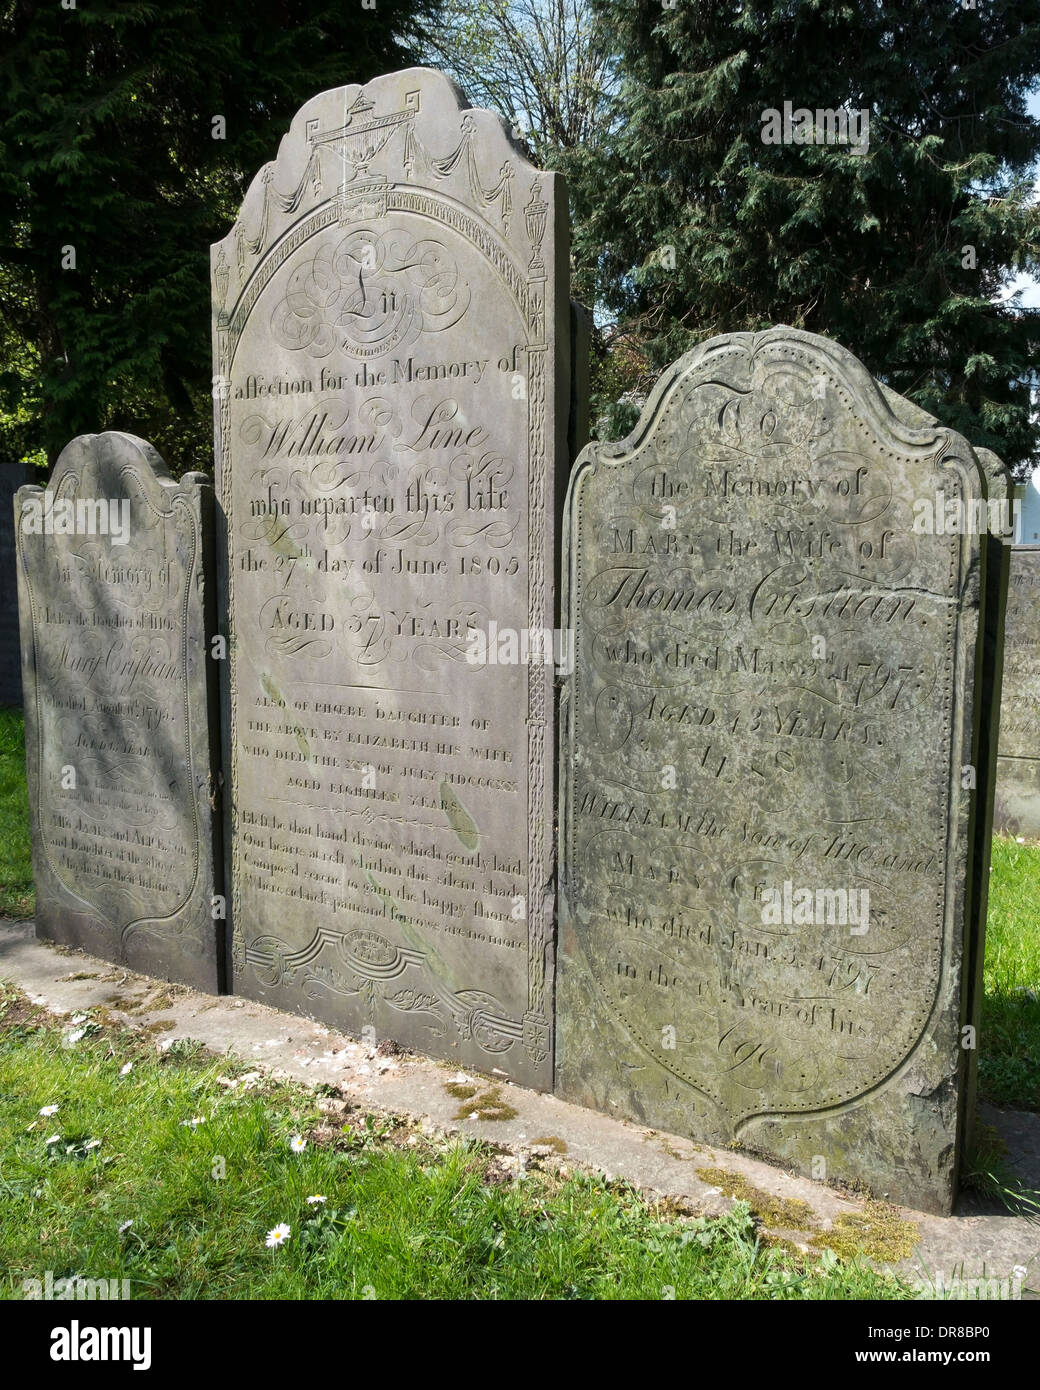 Old gravestones with ornate engraved cursive lettering, St Mary's Churchyard, Melton Mowbray, Leicestershire, England, UK Stock Photo